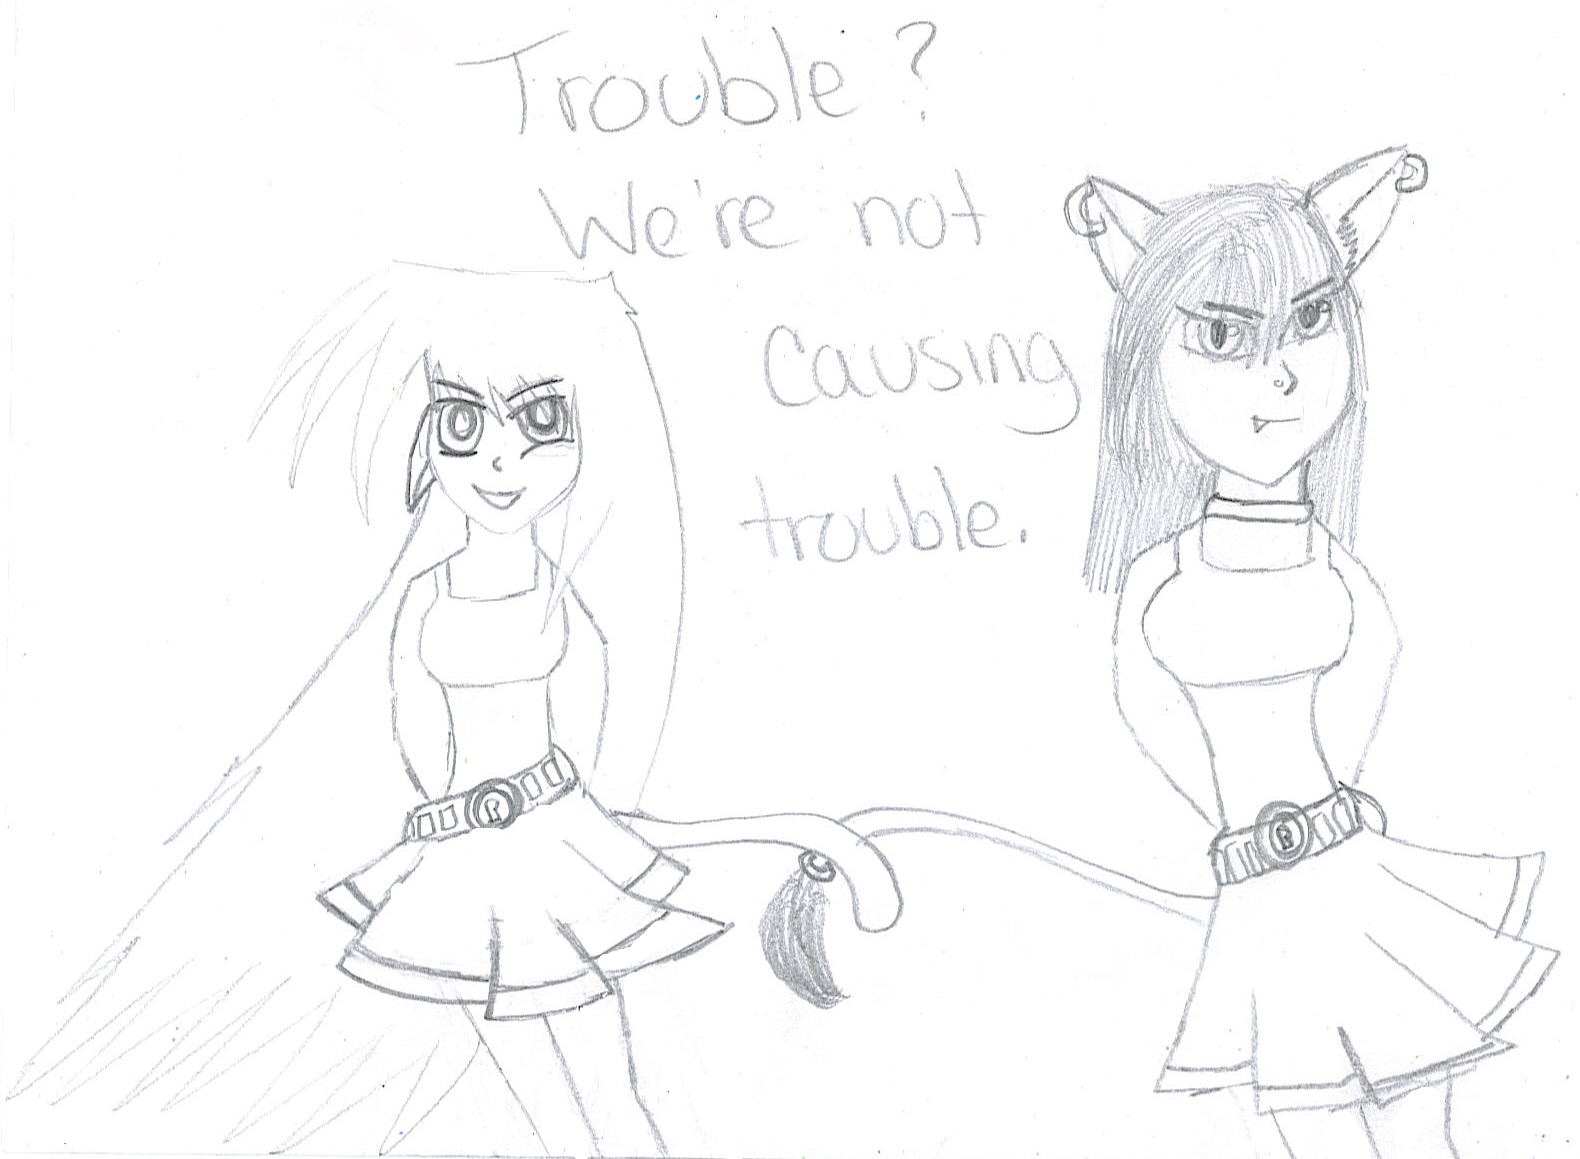 Trouble? Request from Ladychaos by Yami_And_The_Fallen_Angel